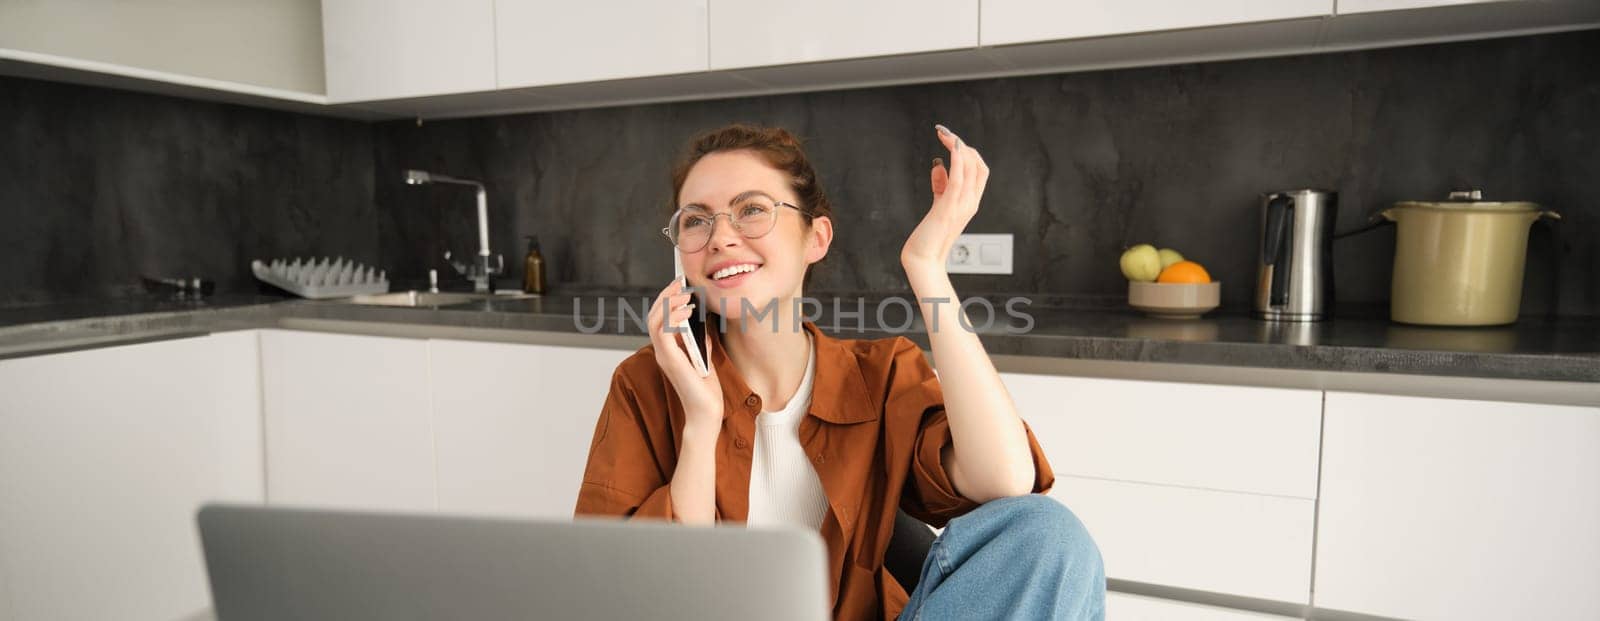 Image of beautiful modern woman working from home, studying in kitchen with laptop, talking on smartphone, calling someone on telephone.